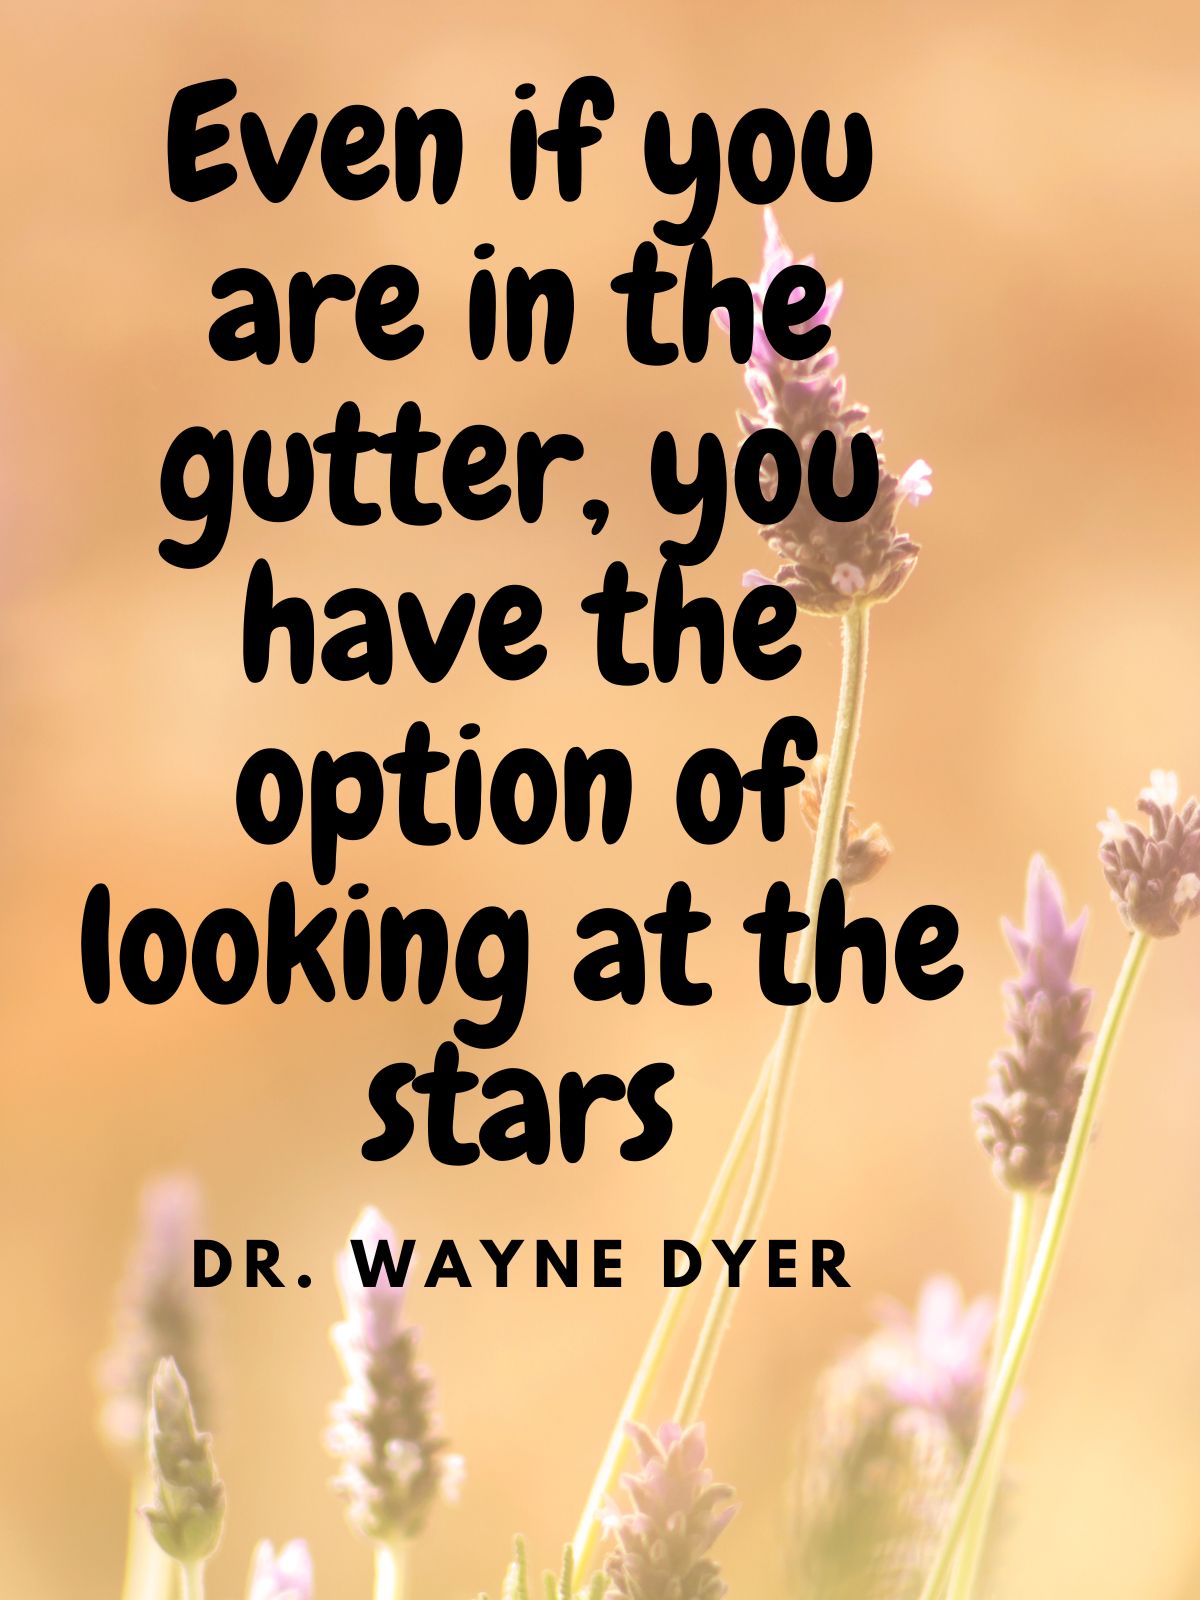 A quote by Dr. Wayne Dyer. Even if You are in the gutter, you have the option of looking at the stars. 